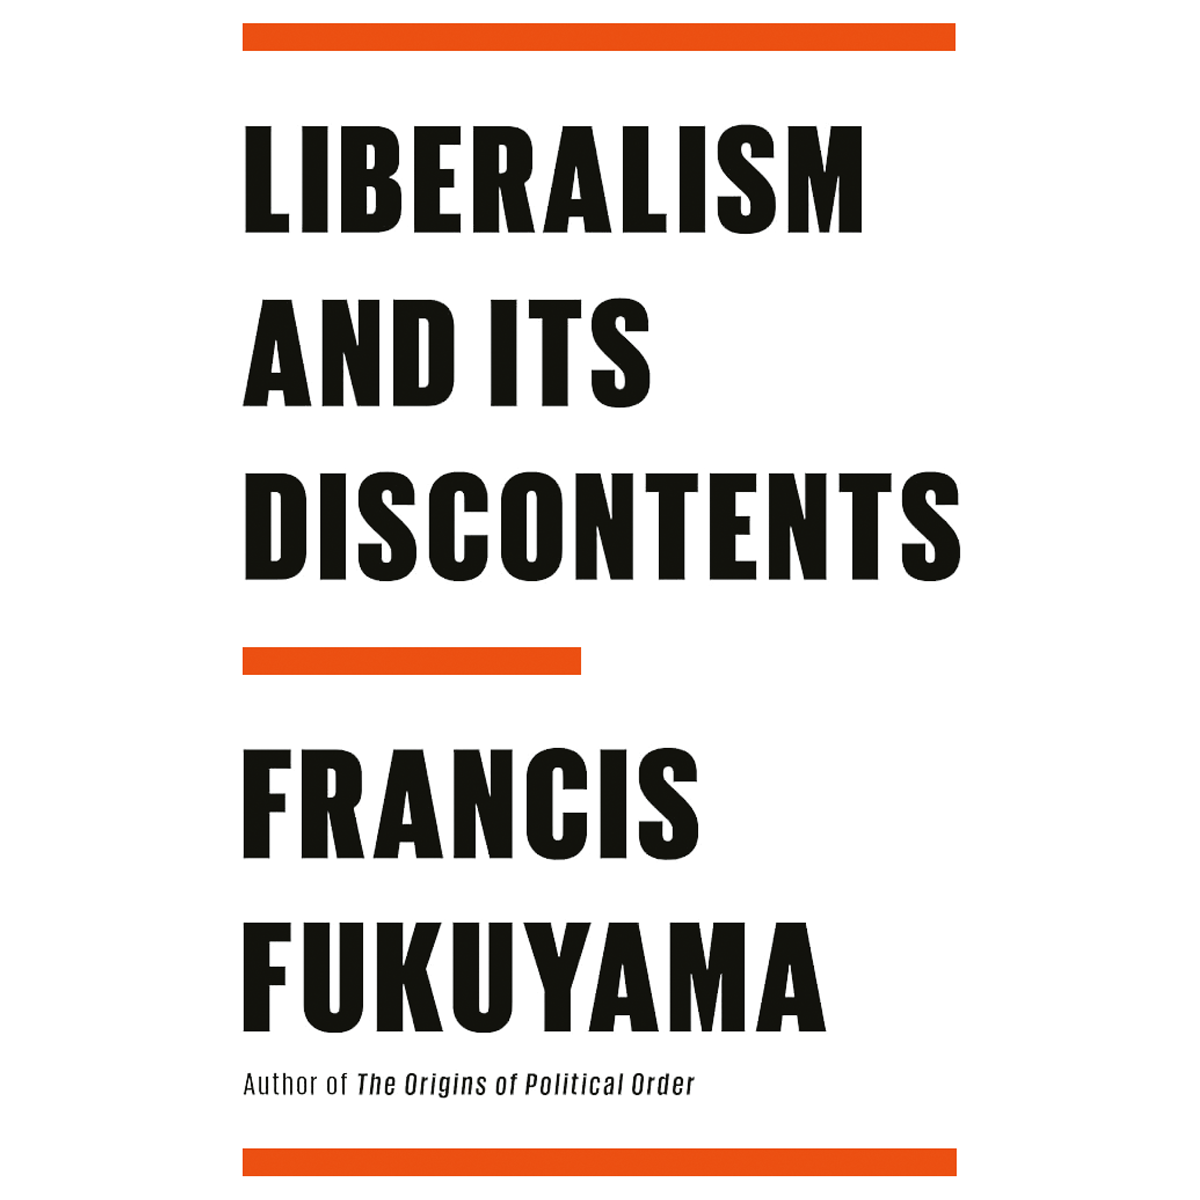 Liberalism and its Discontents